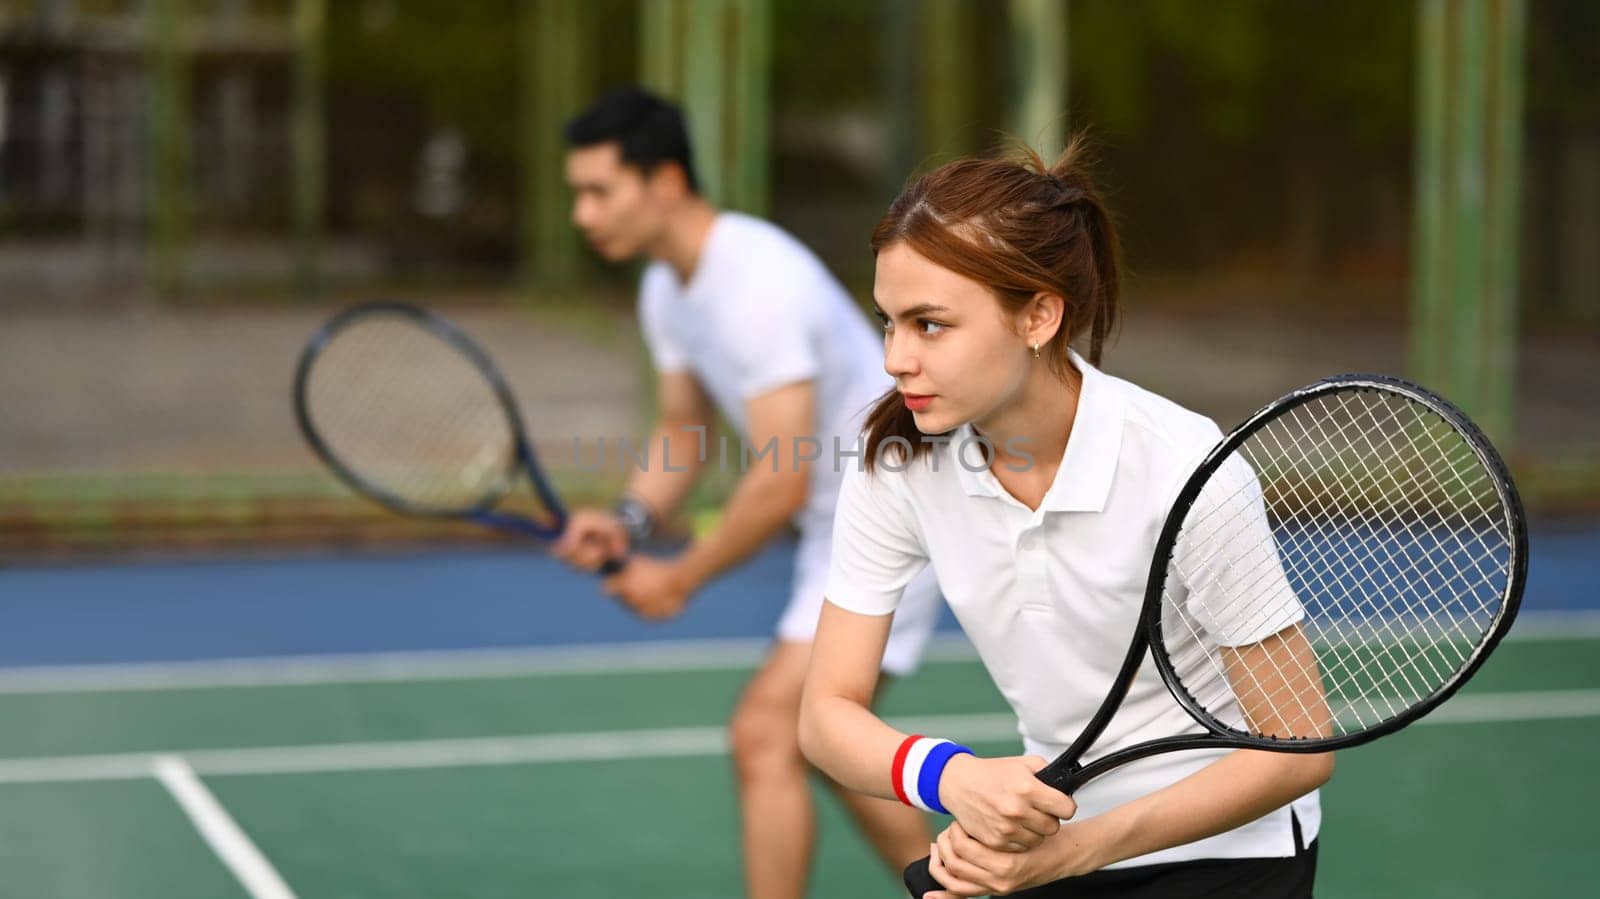 Focused female athlete with a racket waiting to receive ball during match at outdoor court.